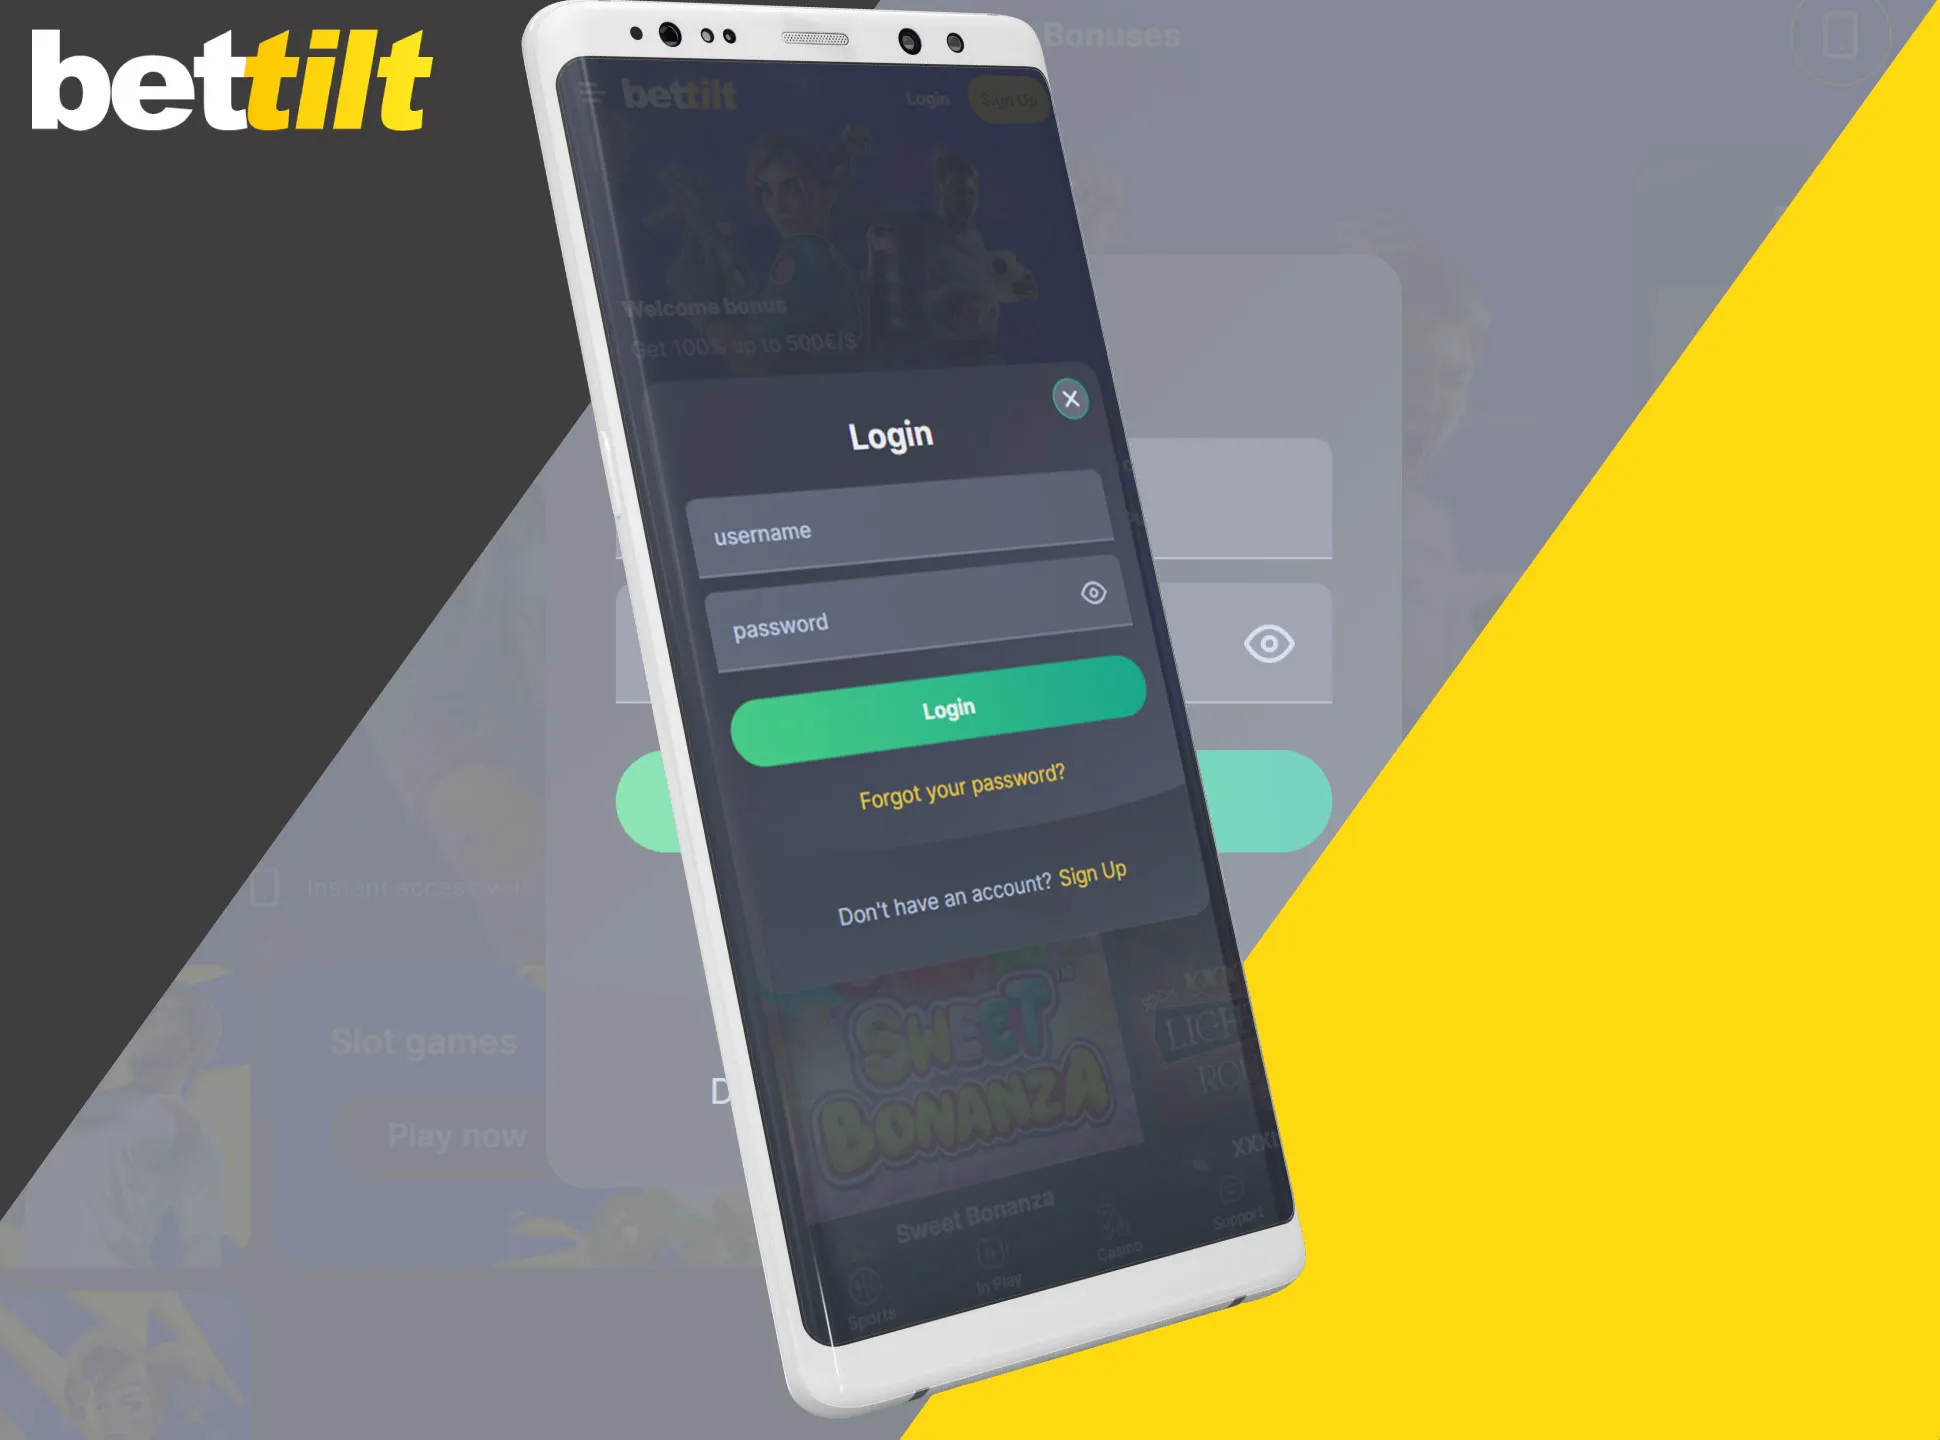 Enter your username and a password to log in to the Bettilt account.